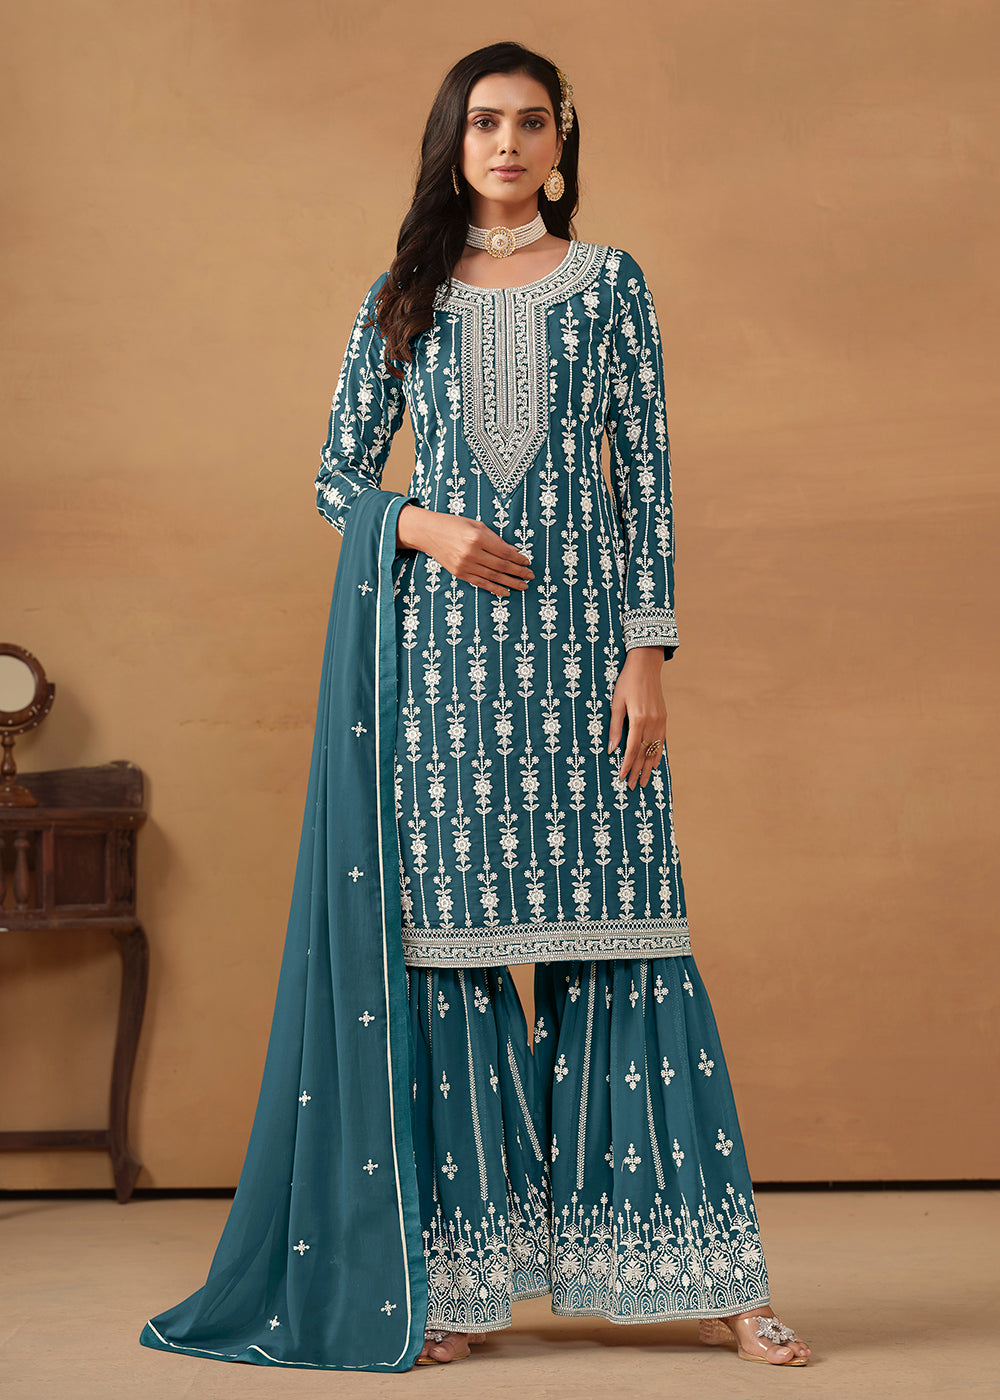 Shop Now Radiant Teal Embroidered Wedding Festive Gharara Suit Online at Empress Clothing in USA, UK, Canada, Italy & Worldwide. 